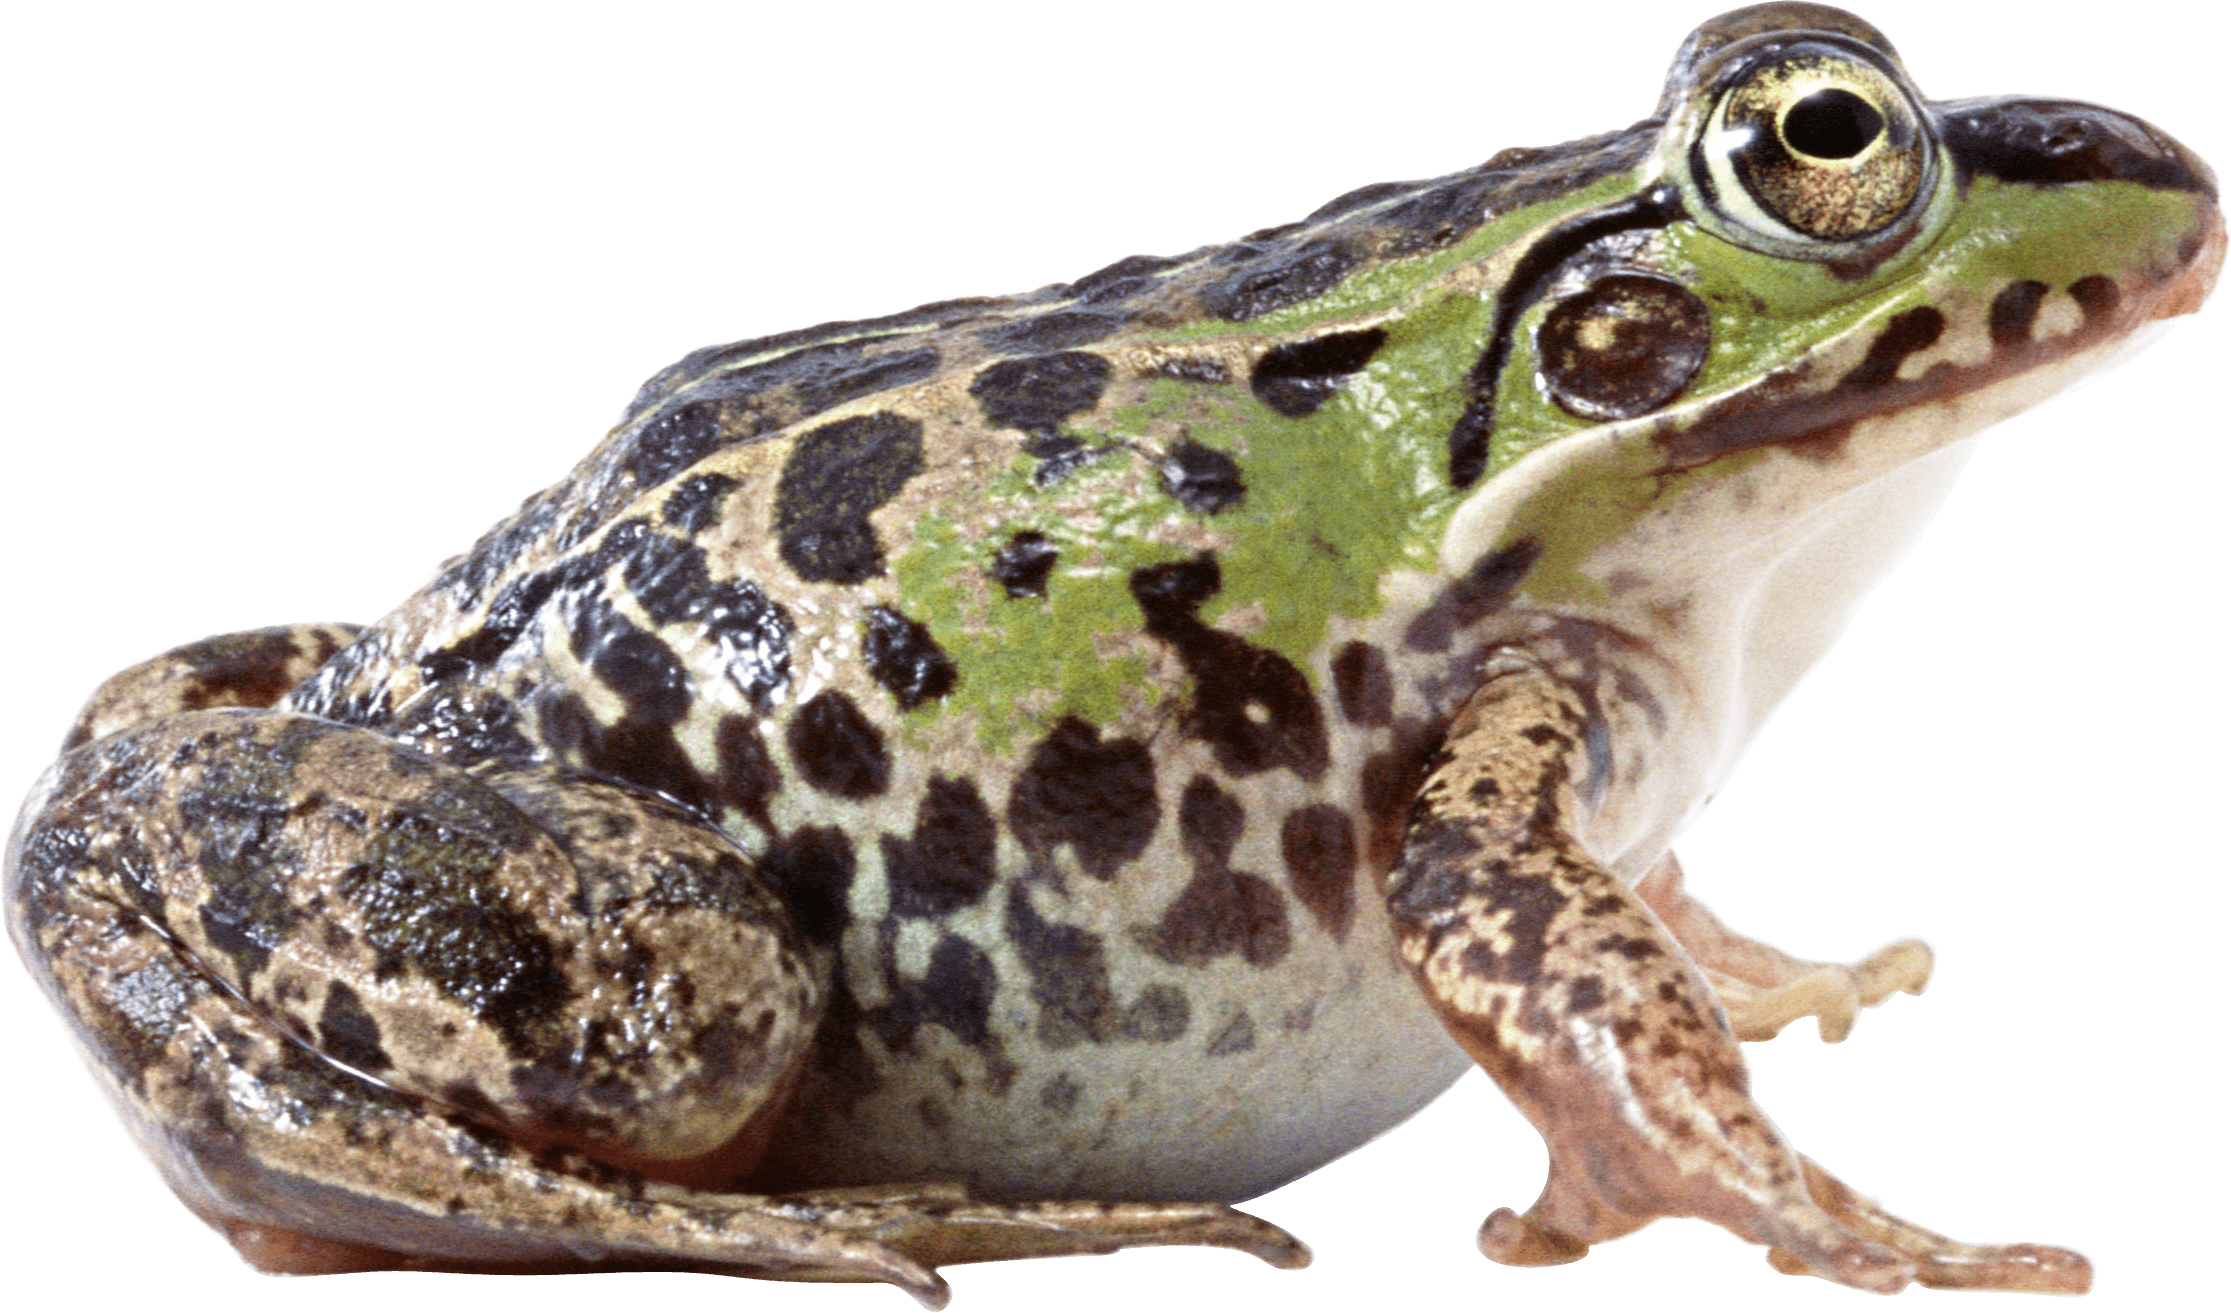 Free Frog Png Results